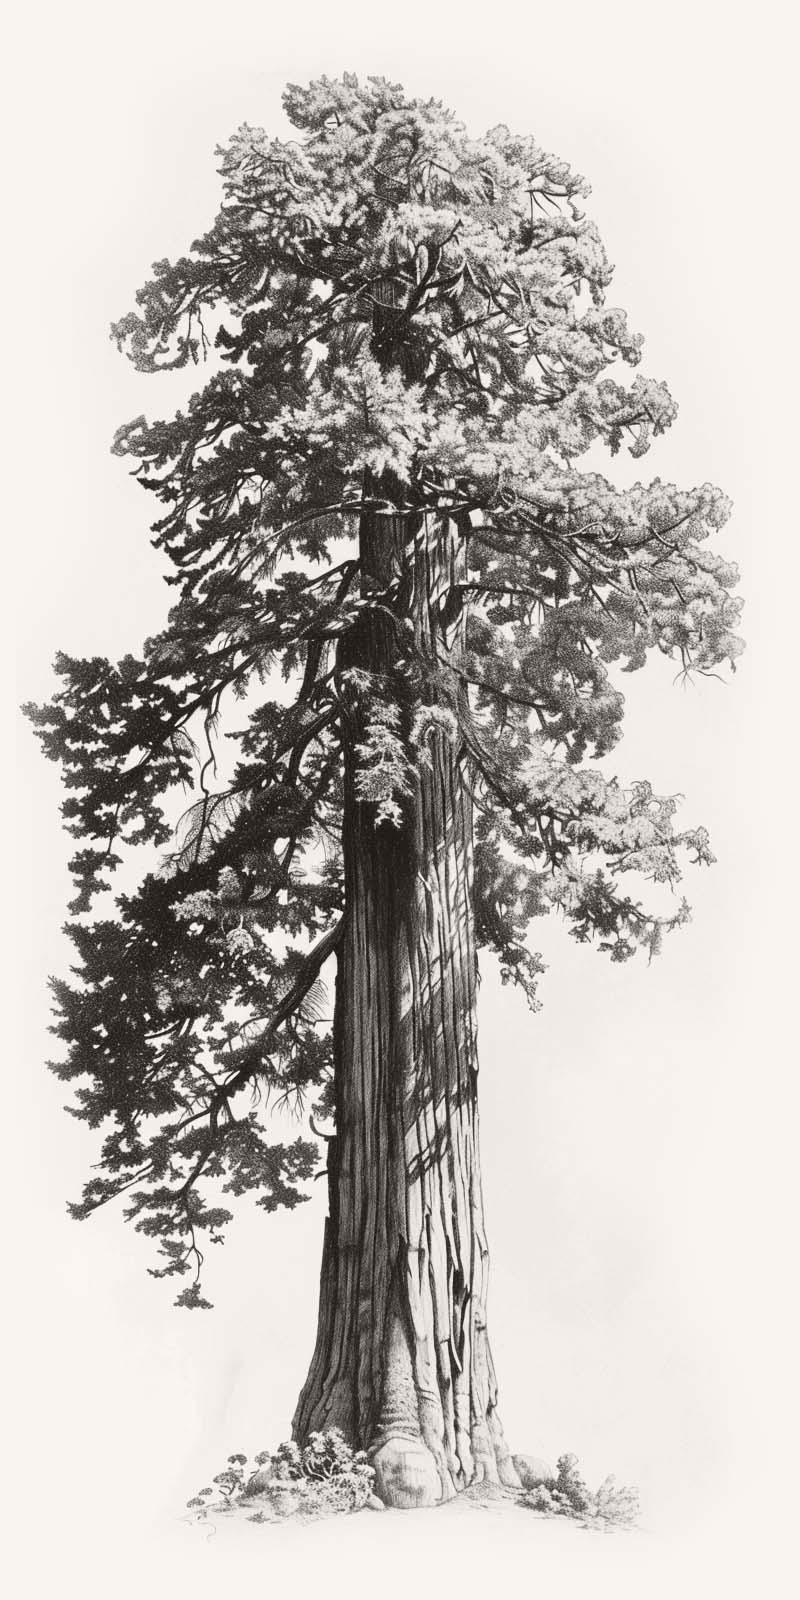 Pencil sketch of a coastal redwood tree, the tallest tree in the world.